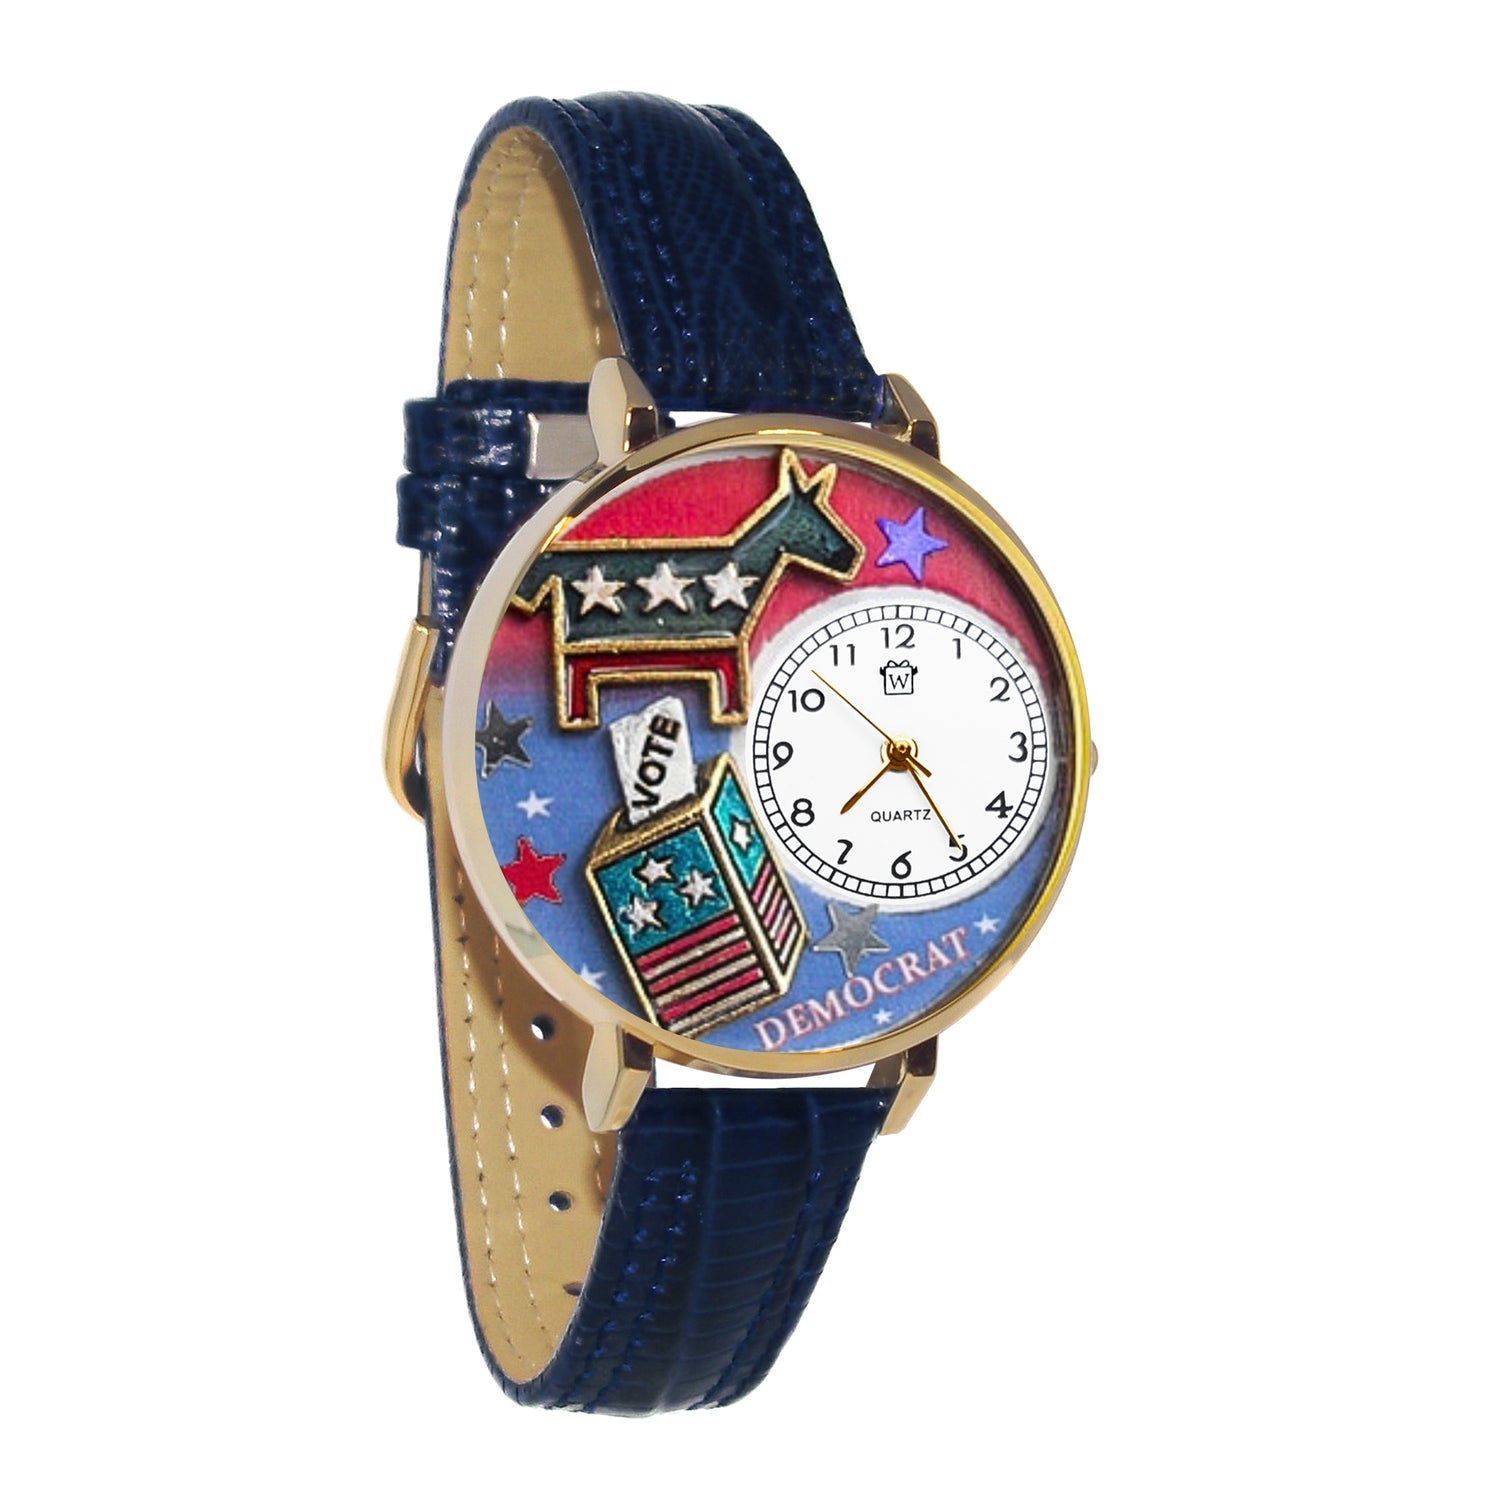 Whimsical Gifts | Democrat 3D Watch Large Style | Handmade in USA | Patriotic |  | Novelty Unique Fun Miniatures Gift | Gold Finish Navy Blue Leather Watch Band